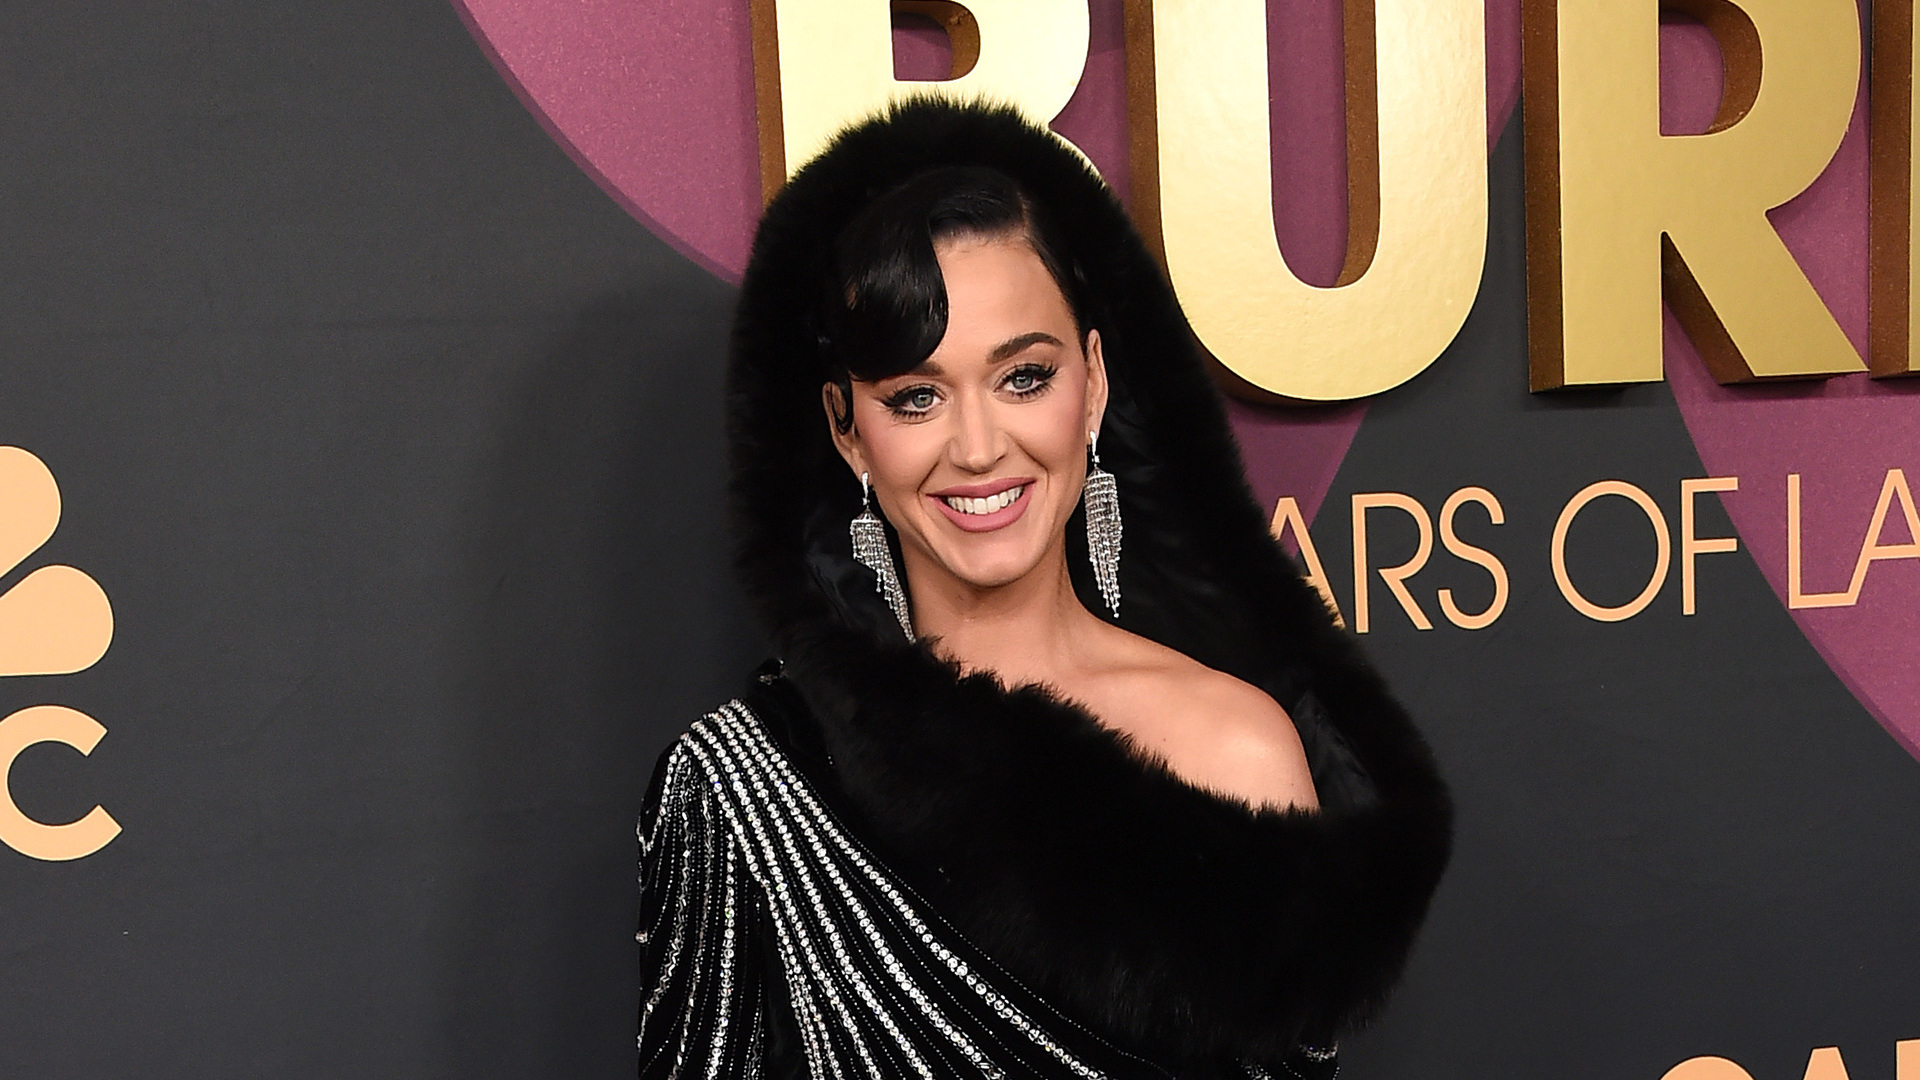 Katy Perry's Real Estate Battle Sparks Law Proposal To Protect Retirees ...